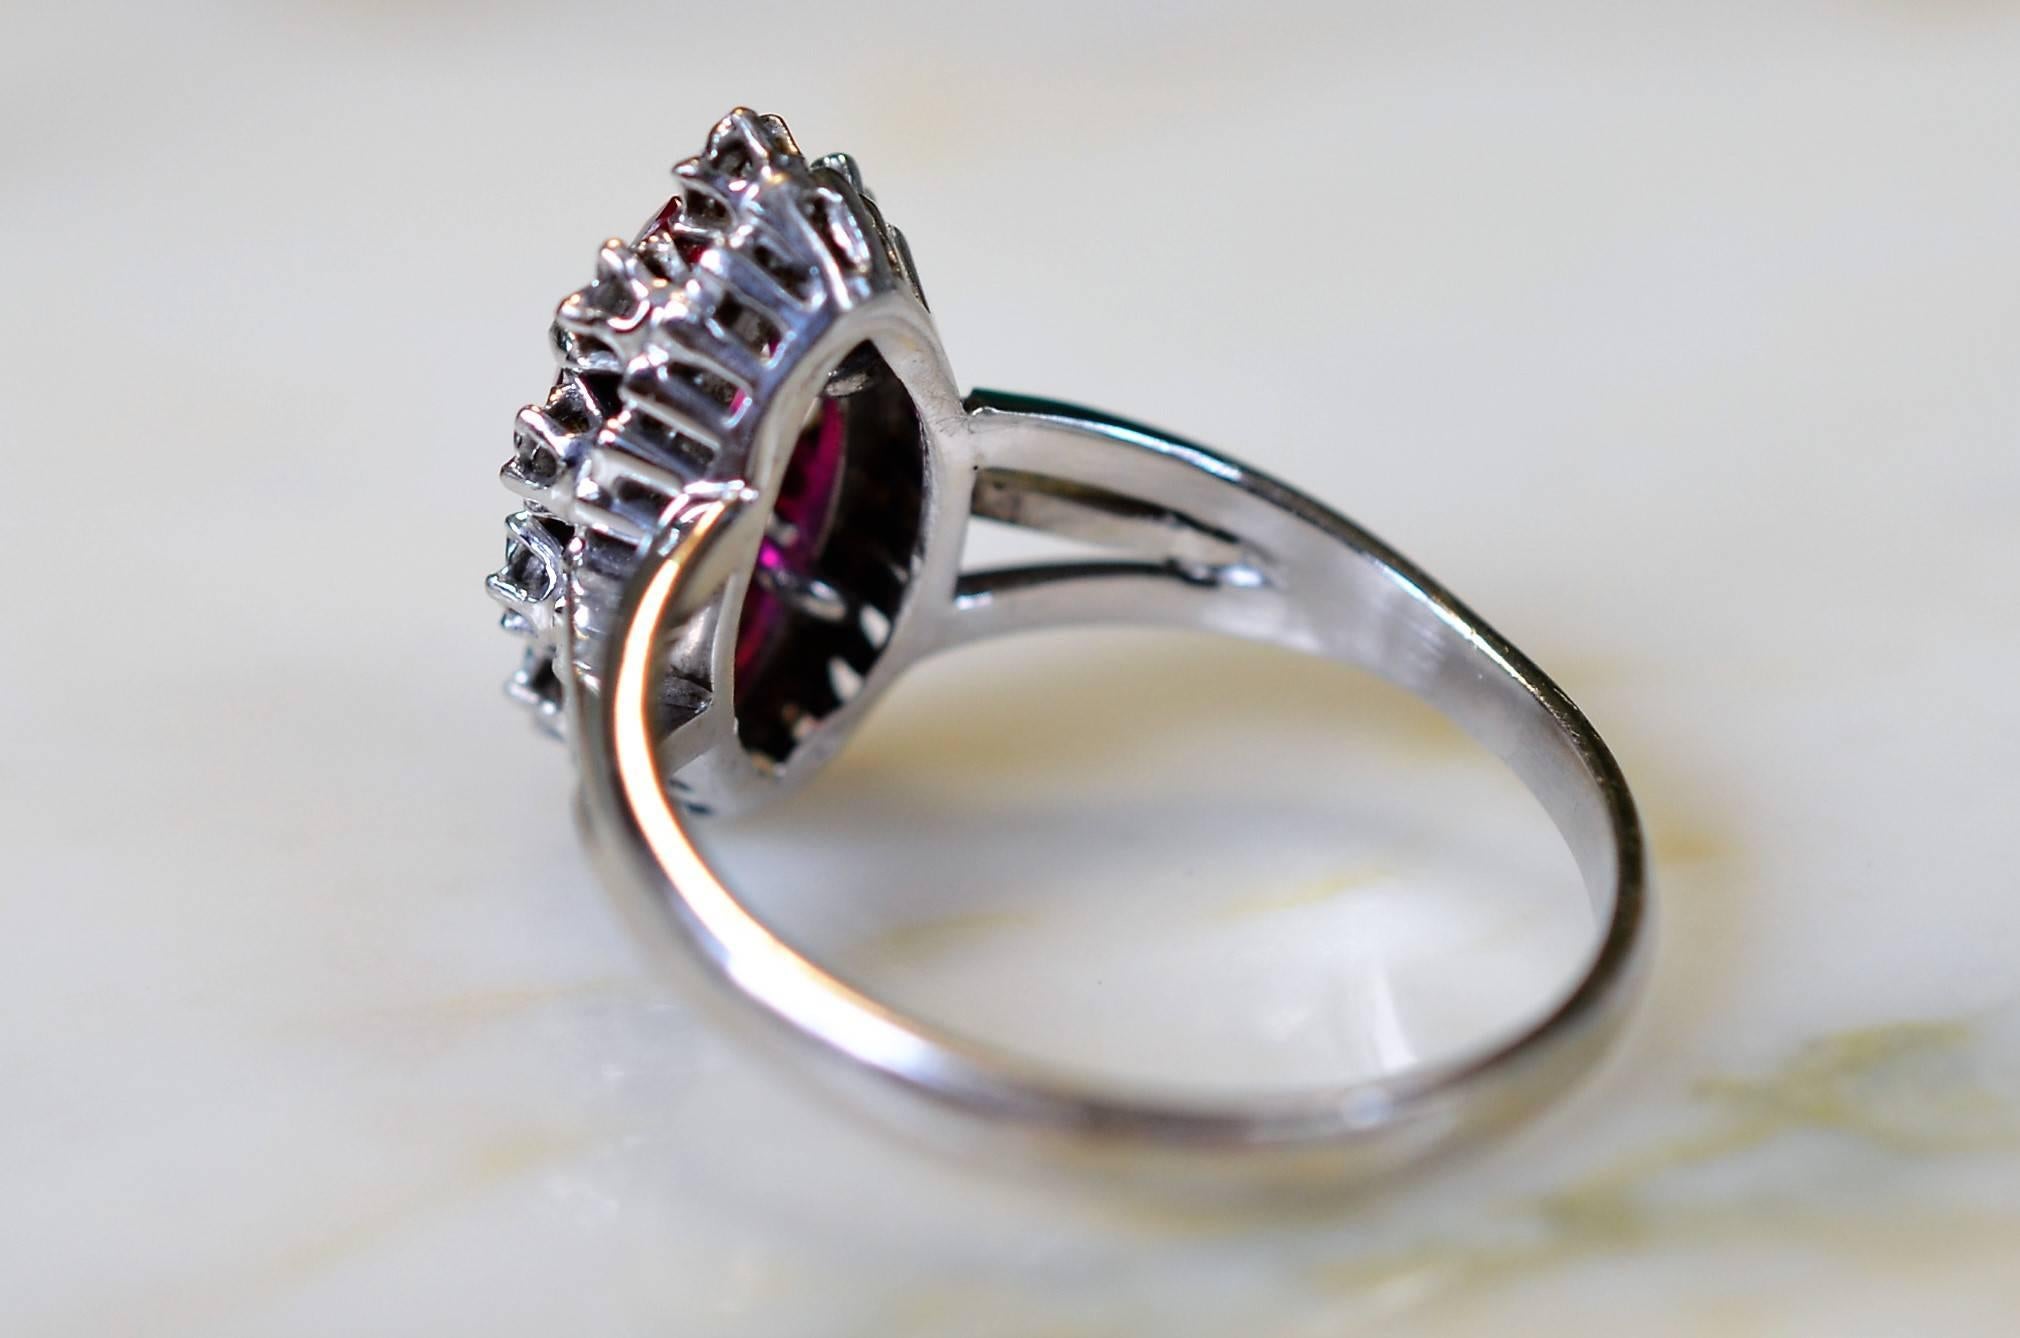 Vintage ring in 18-carat white gold (hallmarked) adorns ruby 11 x 6 mm in a circle of diamonds.

Tour finger: 61.